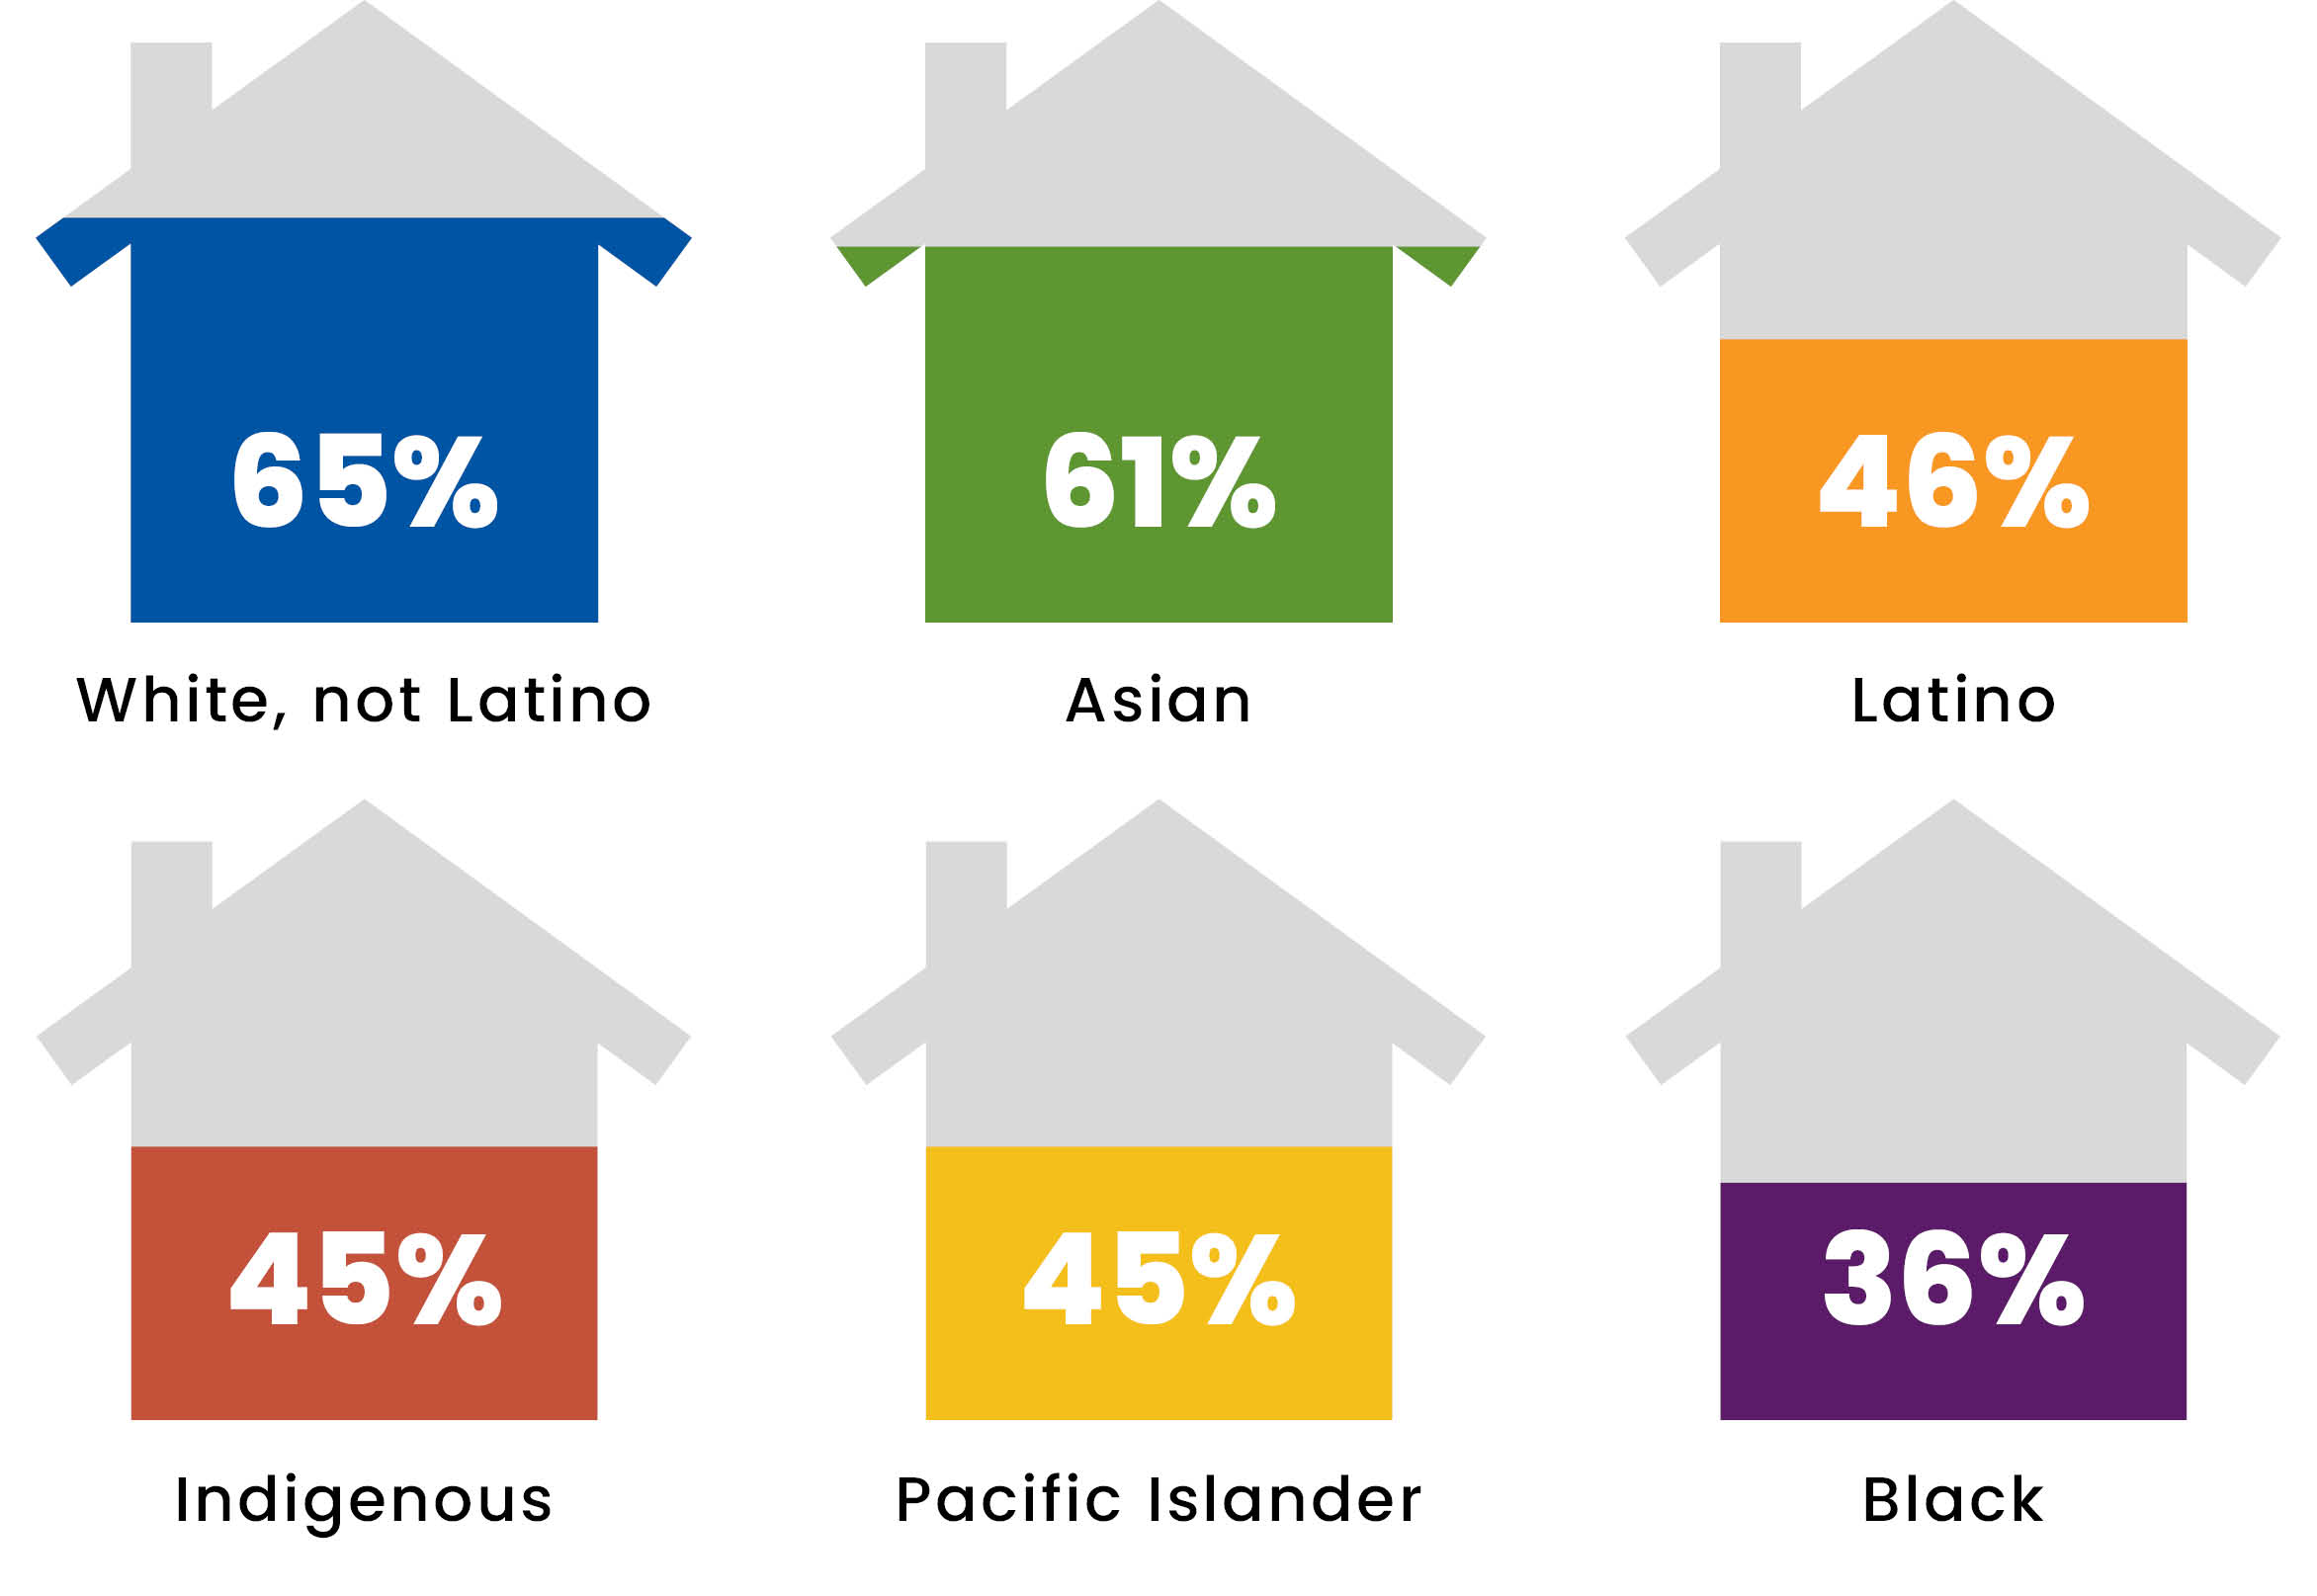 A chart utlizing housing to show the percentage of homeownership by race in California in 2019: the 68% of white population were homeowners, 66% of Asian population were homeowners, 58% of the Native American population were homeowners, 48% of the Latino population were homeowners, and 41% of the Black population were homeowners.